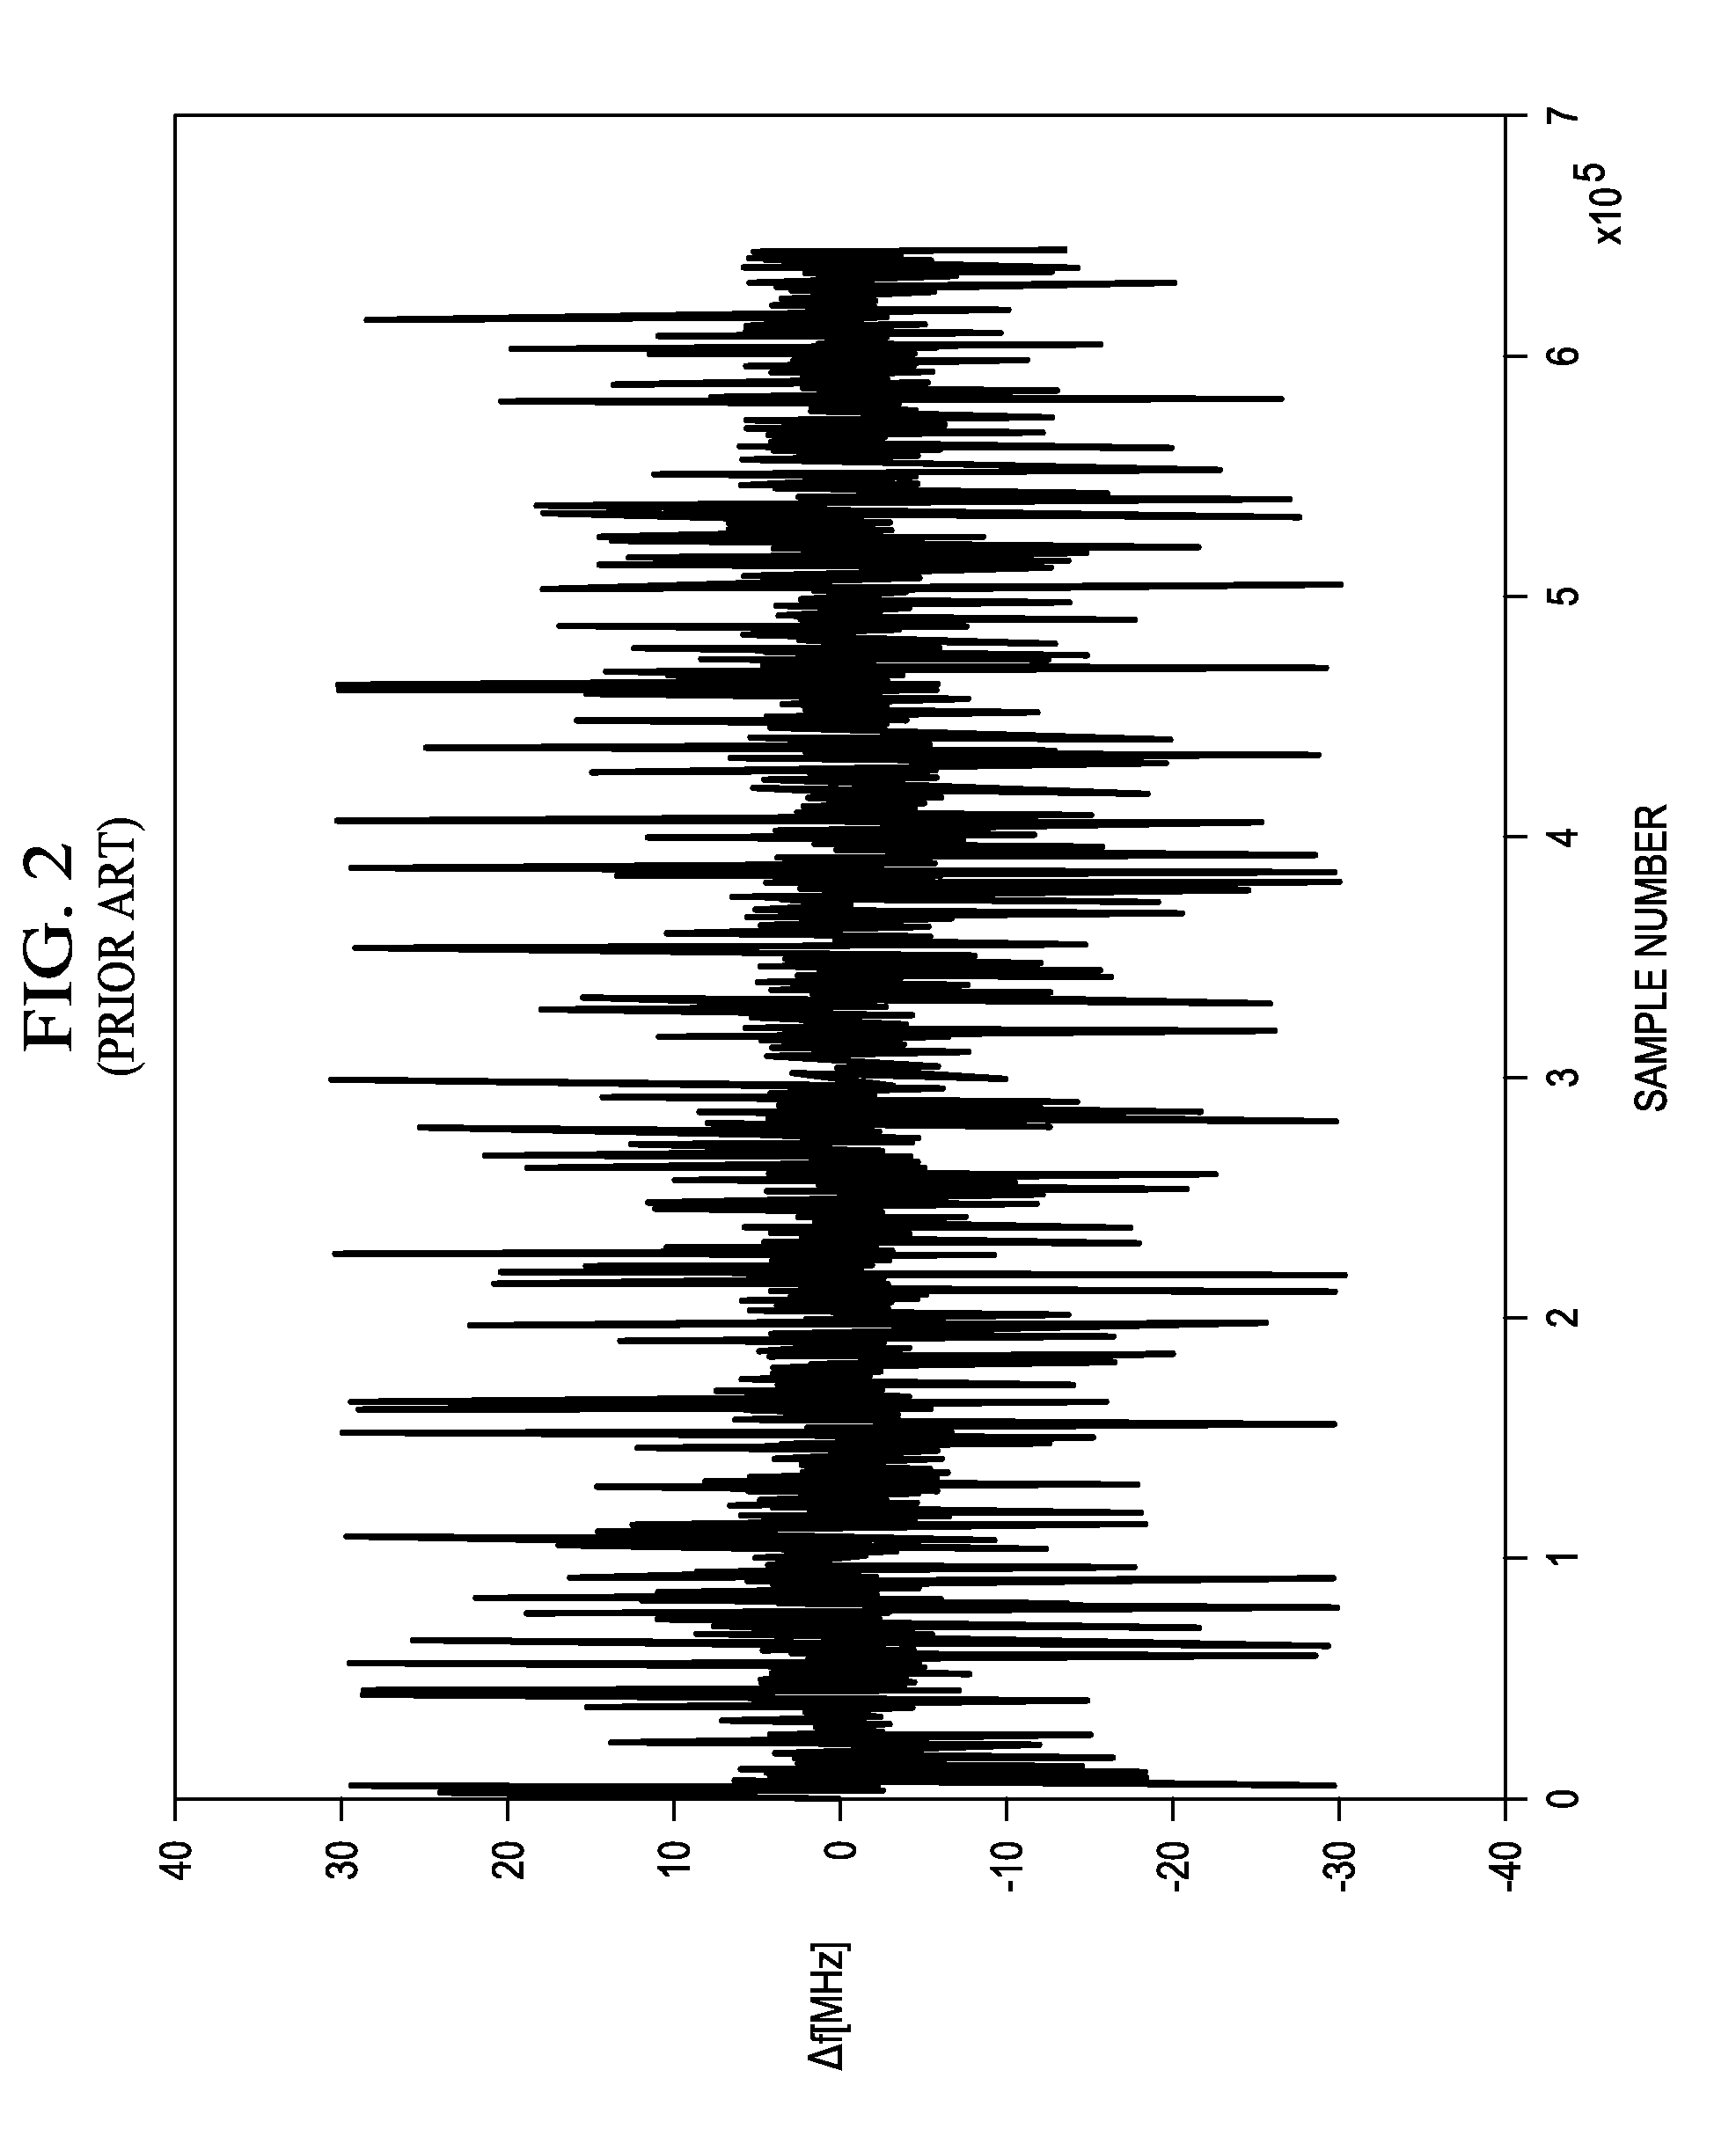 Local oscillator incorporating phase command exception handling utilizing a quadrature switch